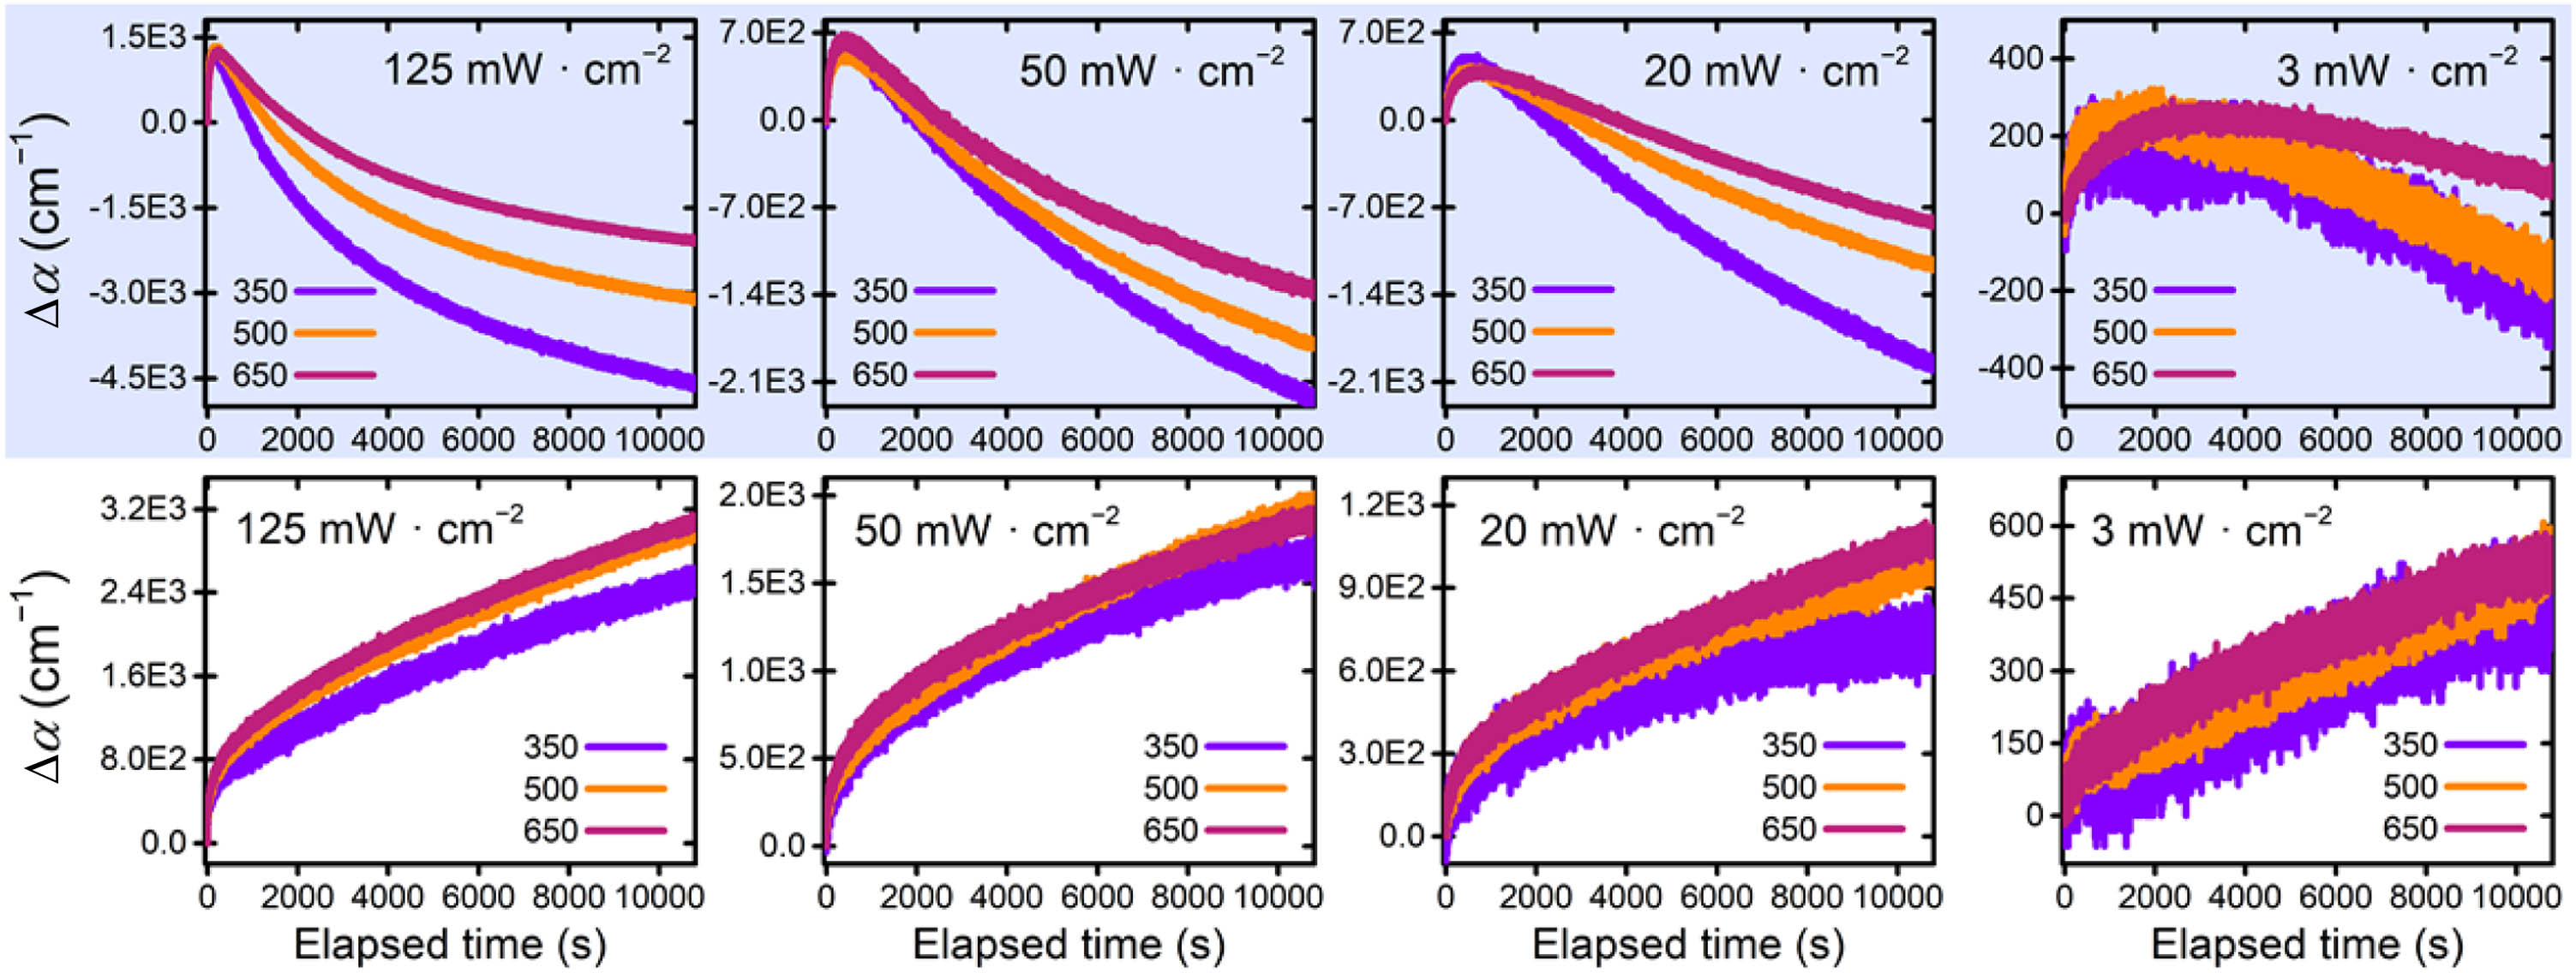 Time evolution of absorption coefficient Δα(t) of as-deposited (top panel) and annealed (bottom panel) Ge-Sb-Se thin films upon room-temperature irradiation depending on thicknesses (in nm) at different laser optical intensities varying from 3 to 125 mW·cm−2.